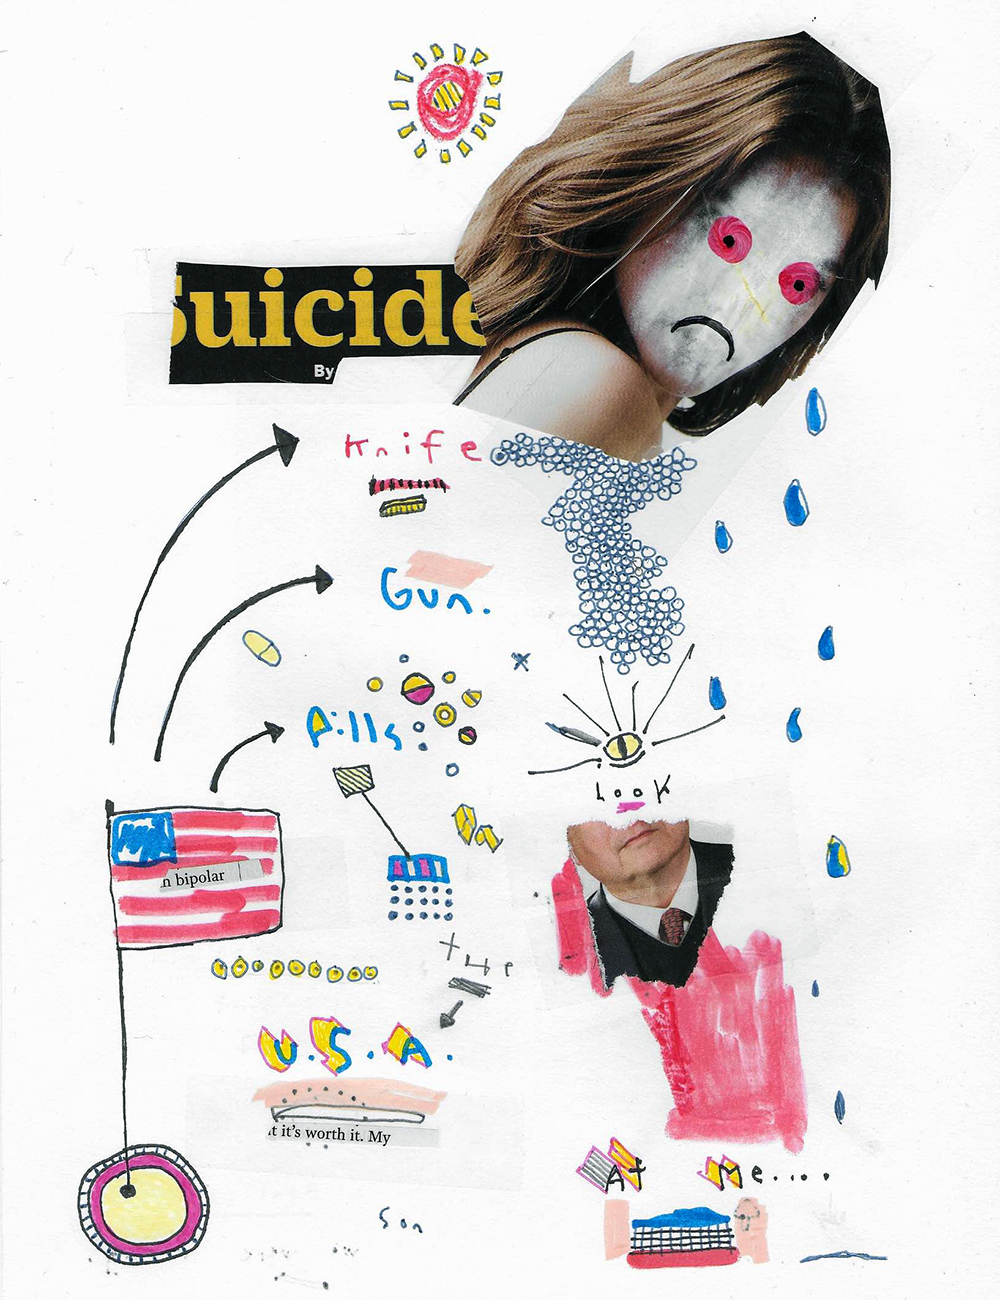 Collage about ways to commit suicide